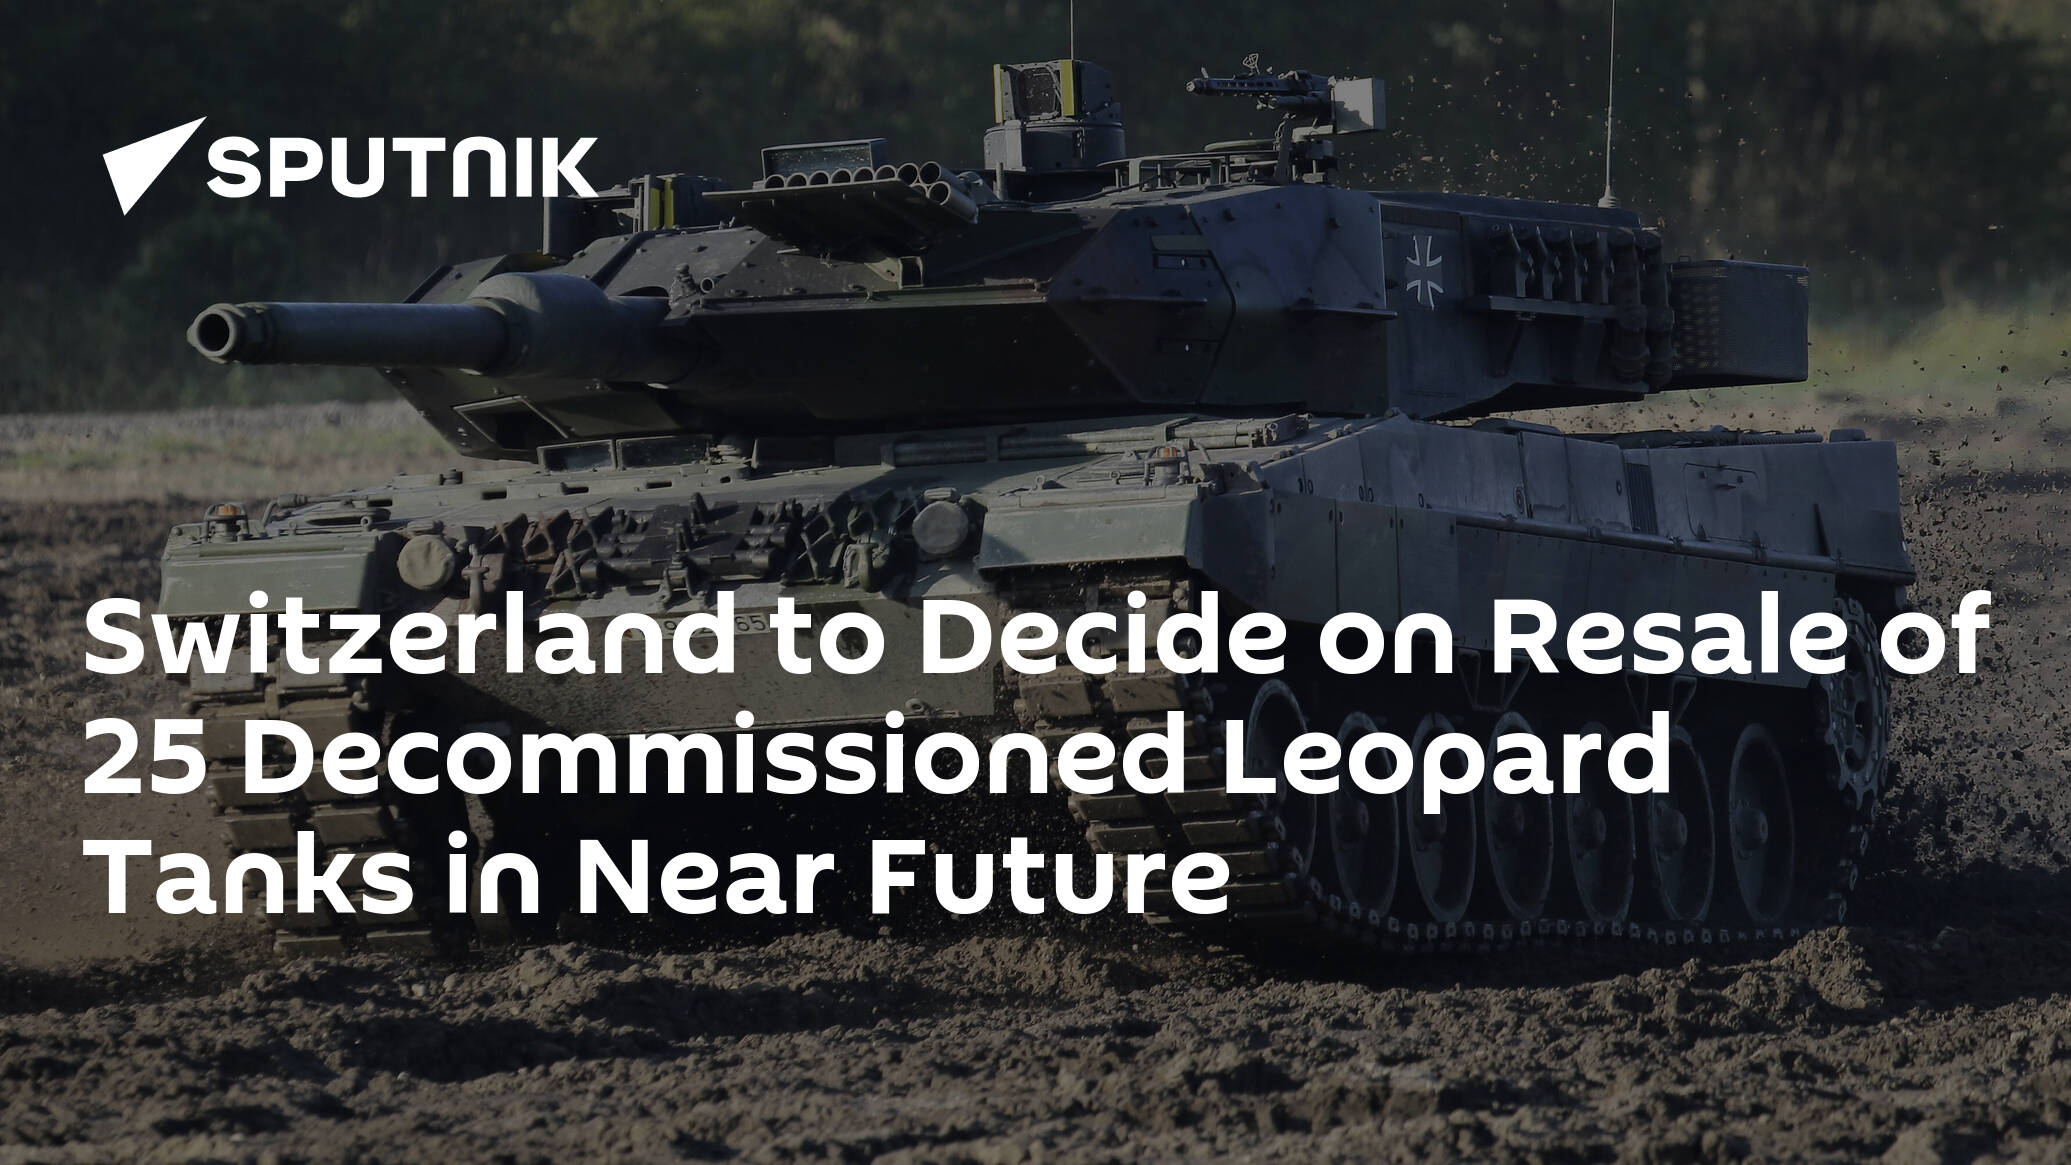 Switzerland to Decide on Resale of 25 Decommissioned Leopard Tanks in Near Future